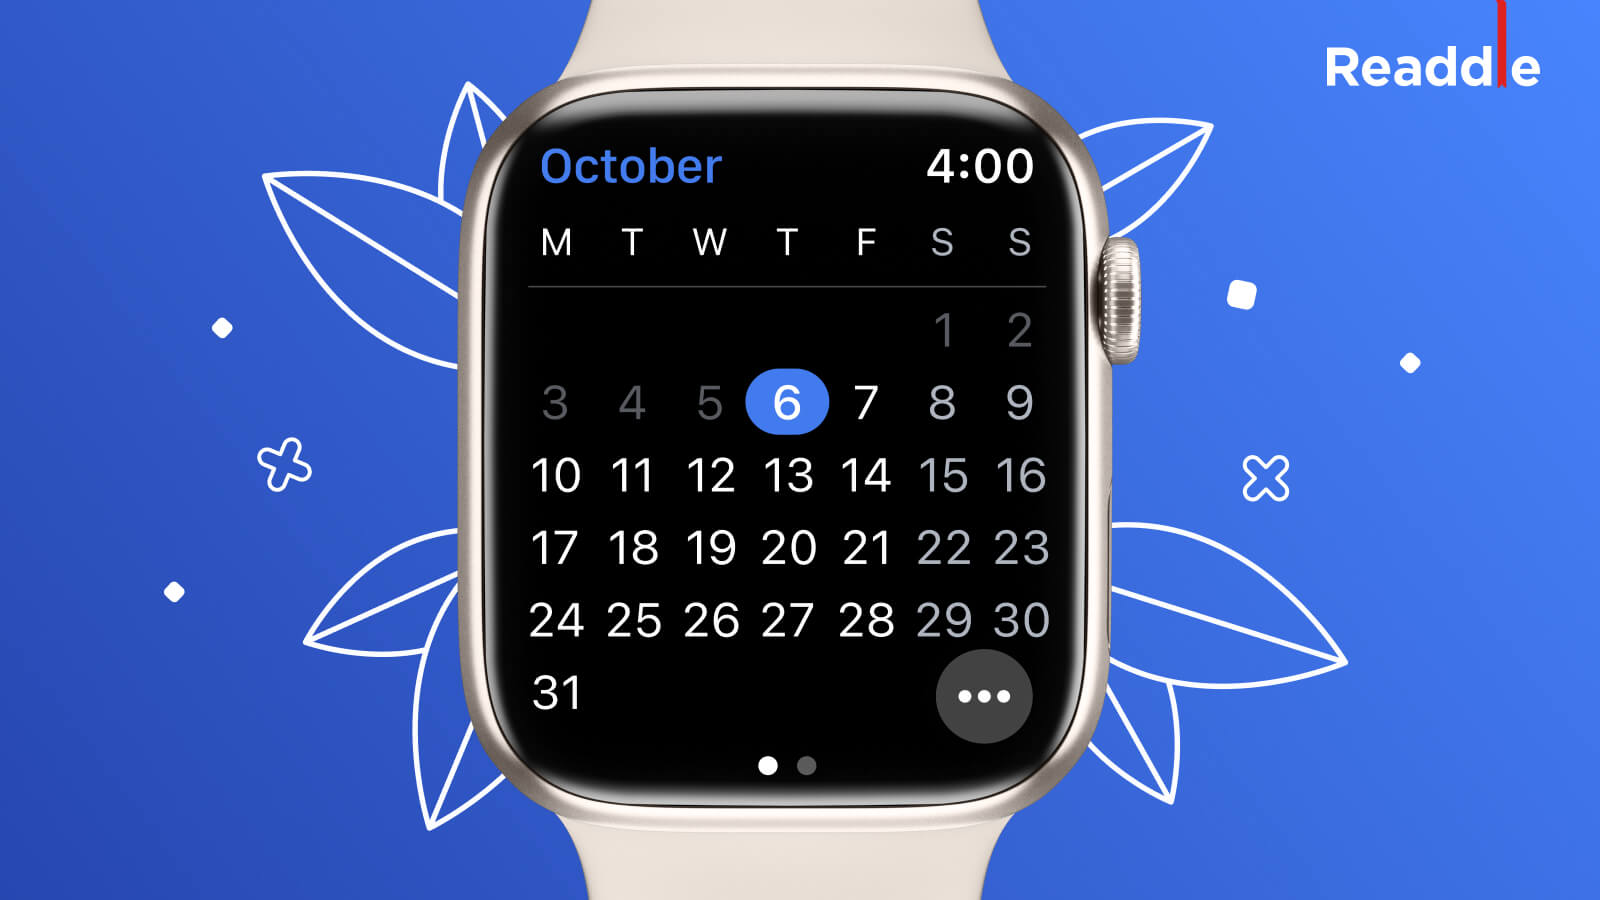 Readdle launches overhauled Calendars app for Apple Watch with new UI